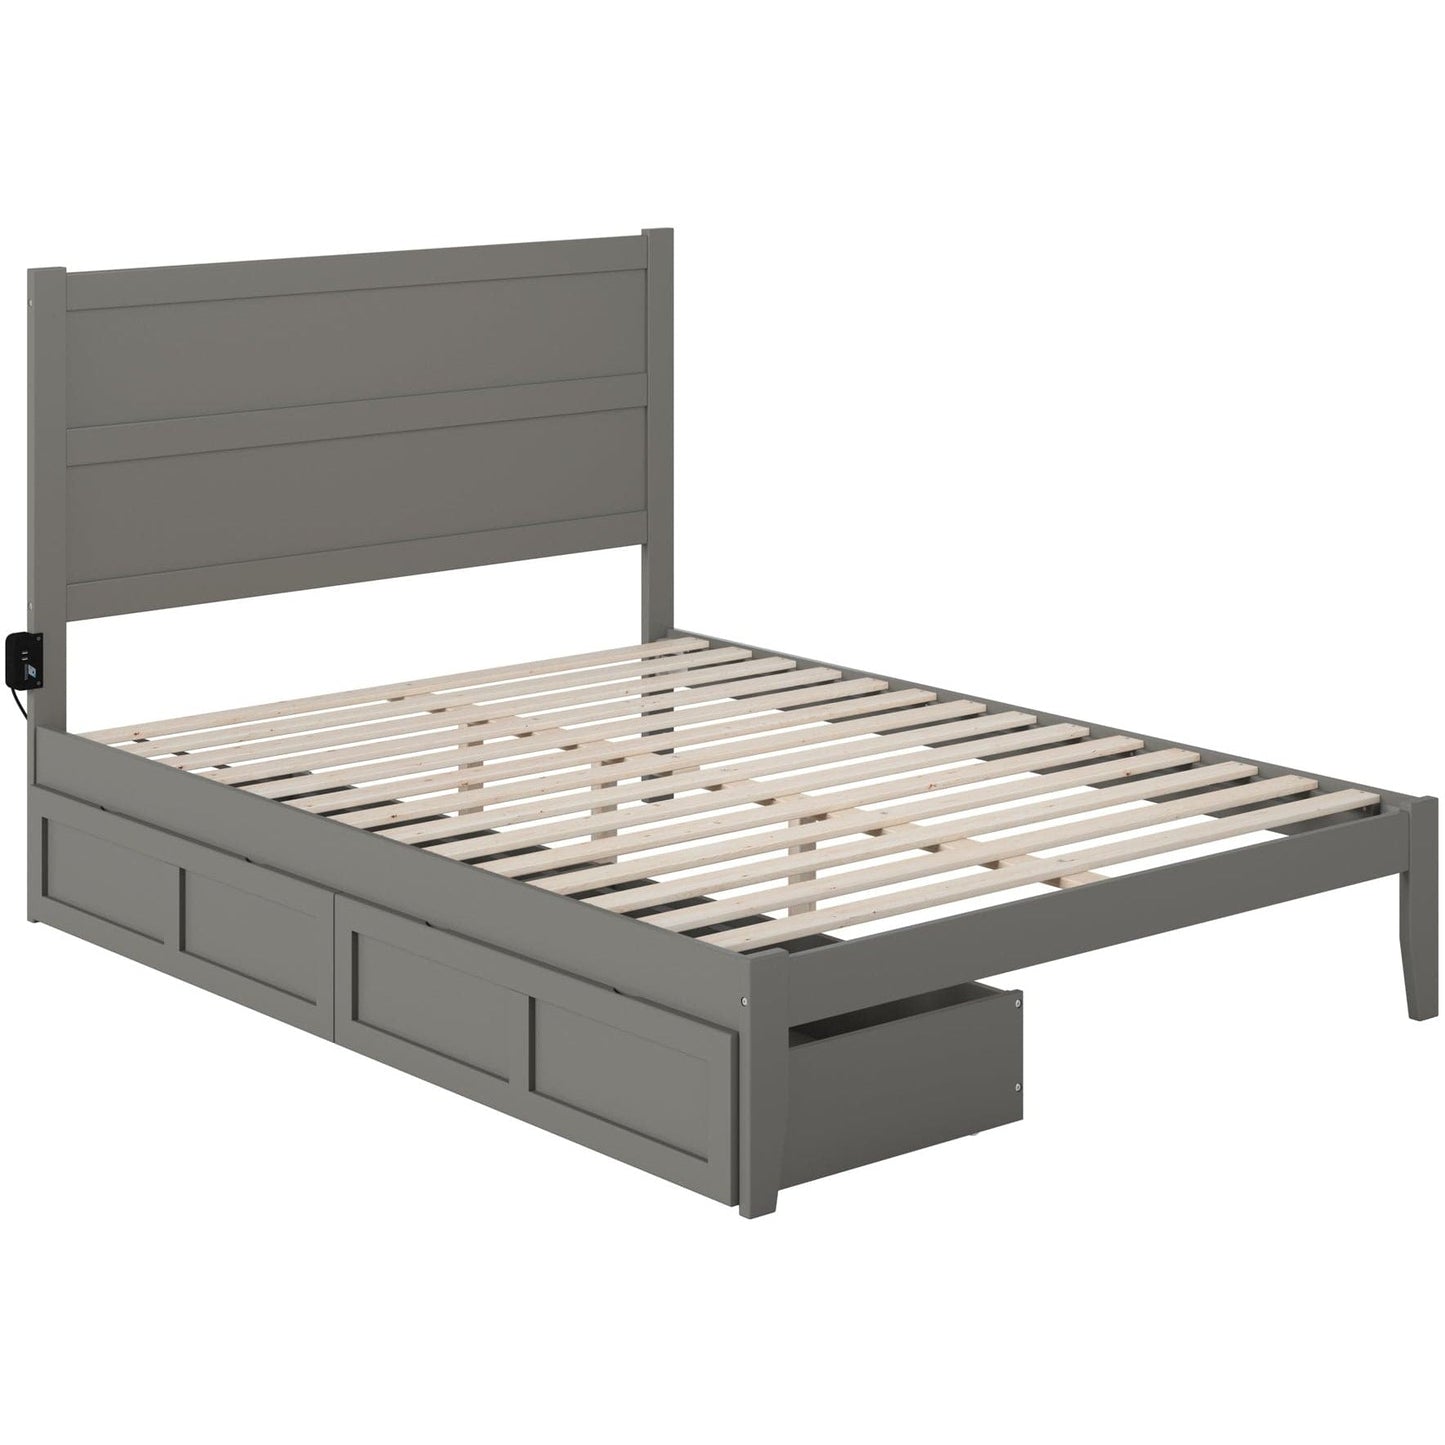 AFI Furnishings NoHo Queen Bed with 2 Drawers in Grey AG9113449